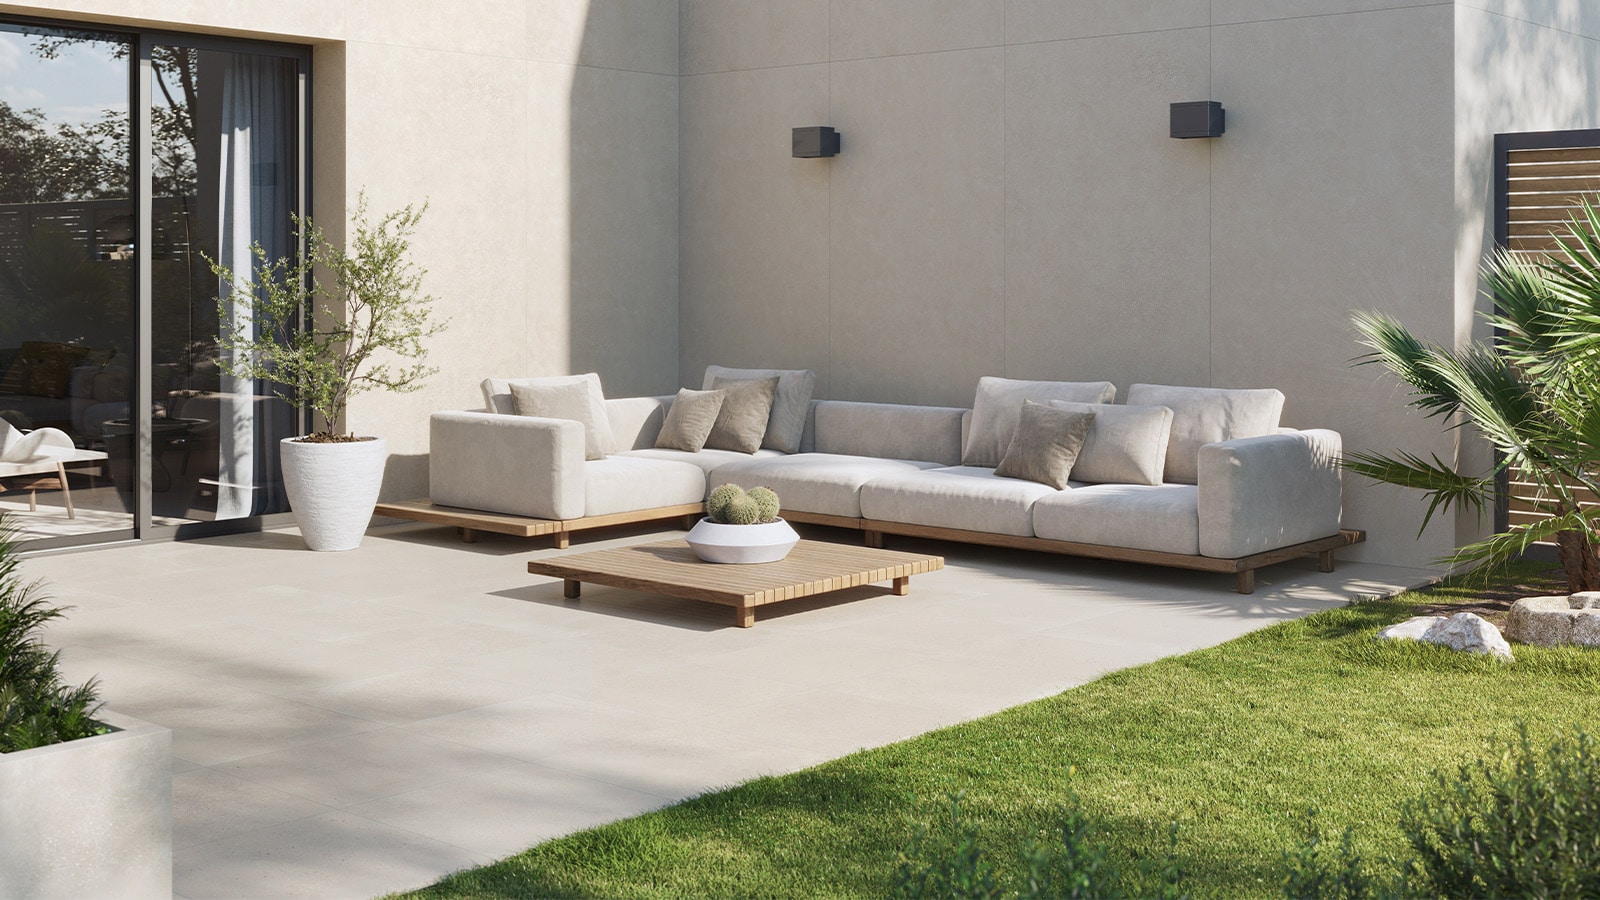 Summer special: Resistant materials for gardens and terraces